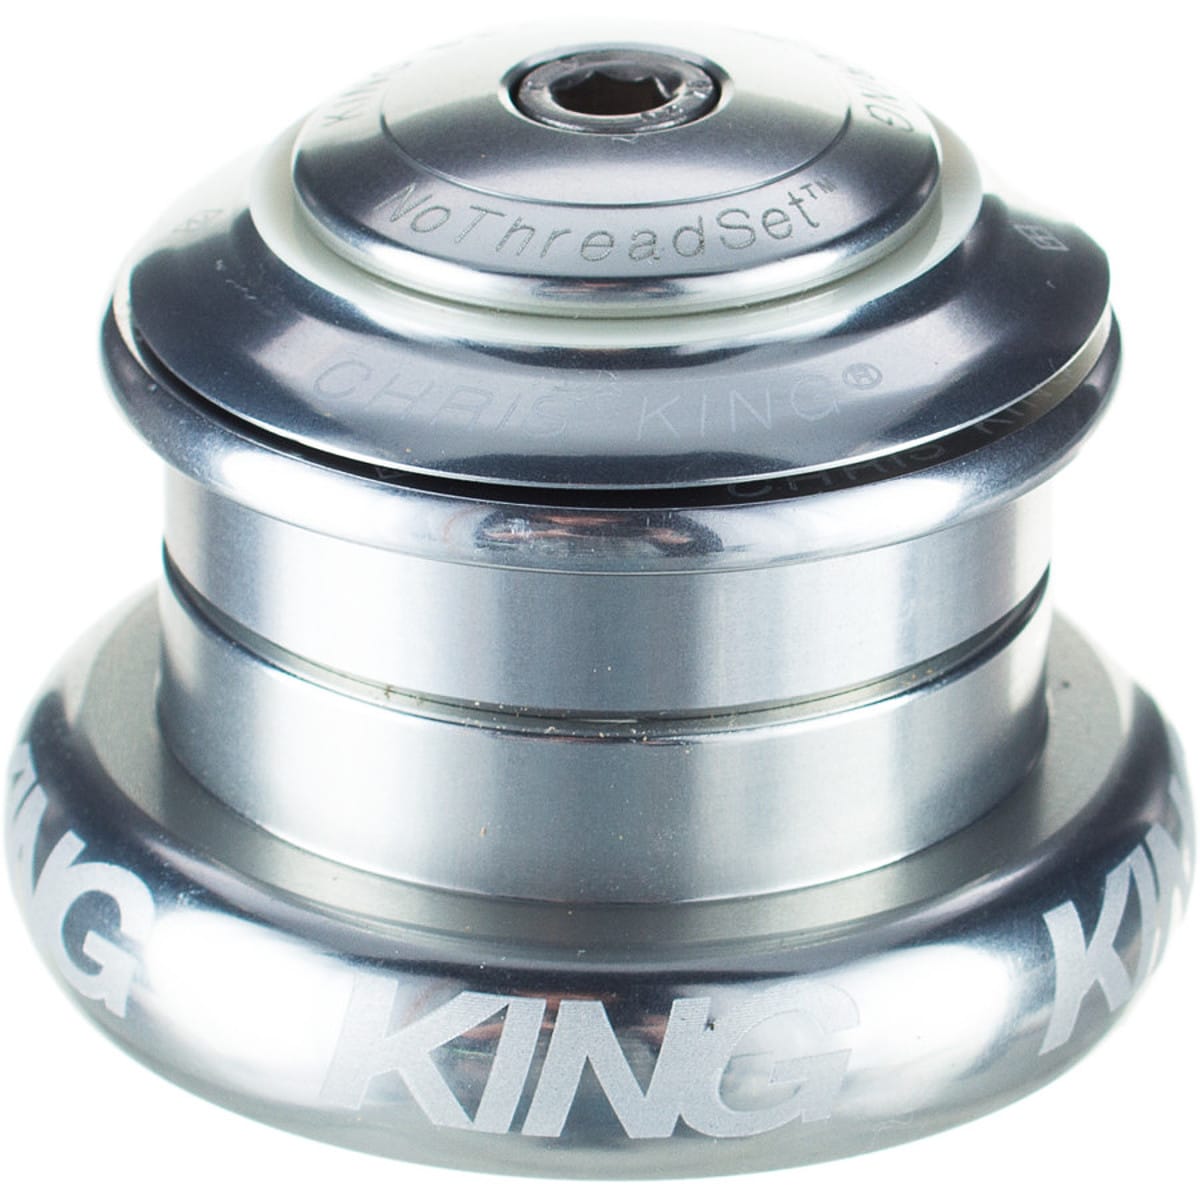 Chris King Inset 7 Headset Silver, Tapered Inset